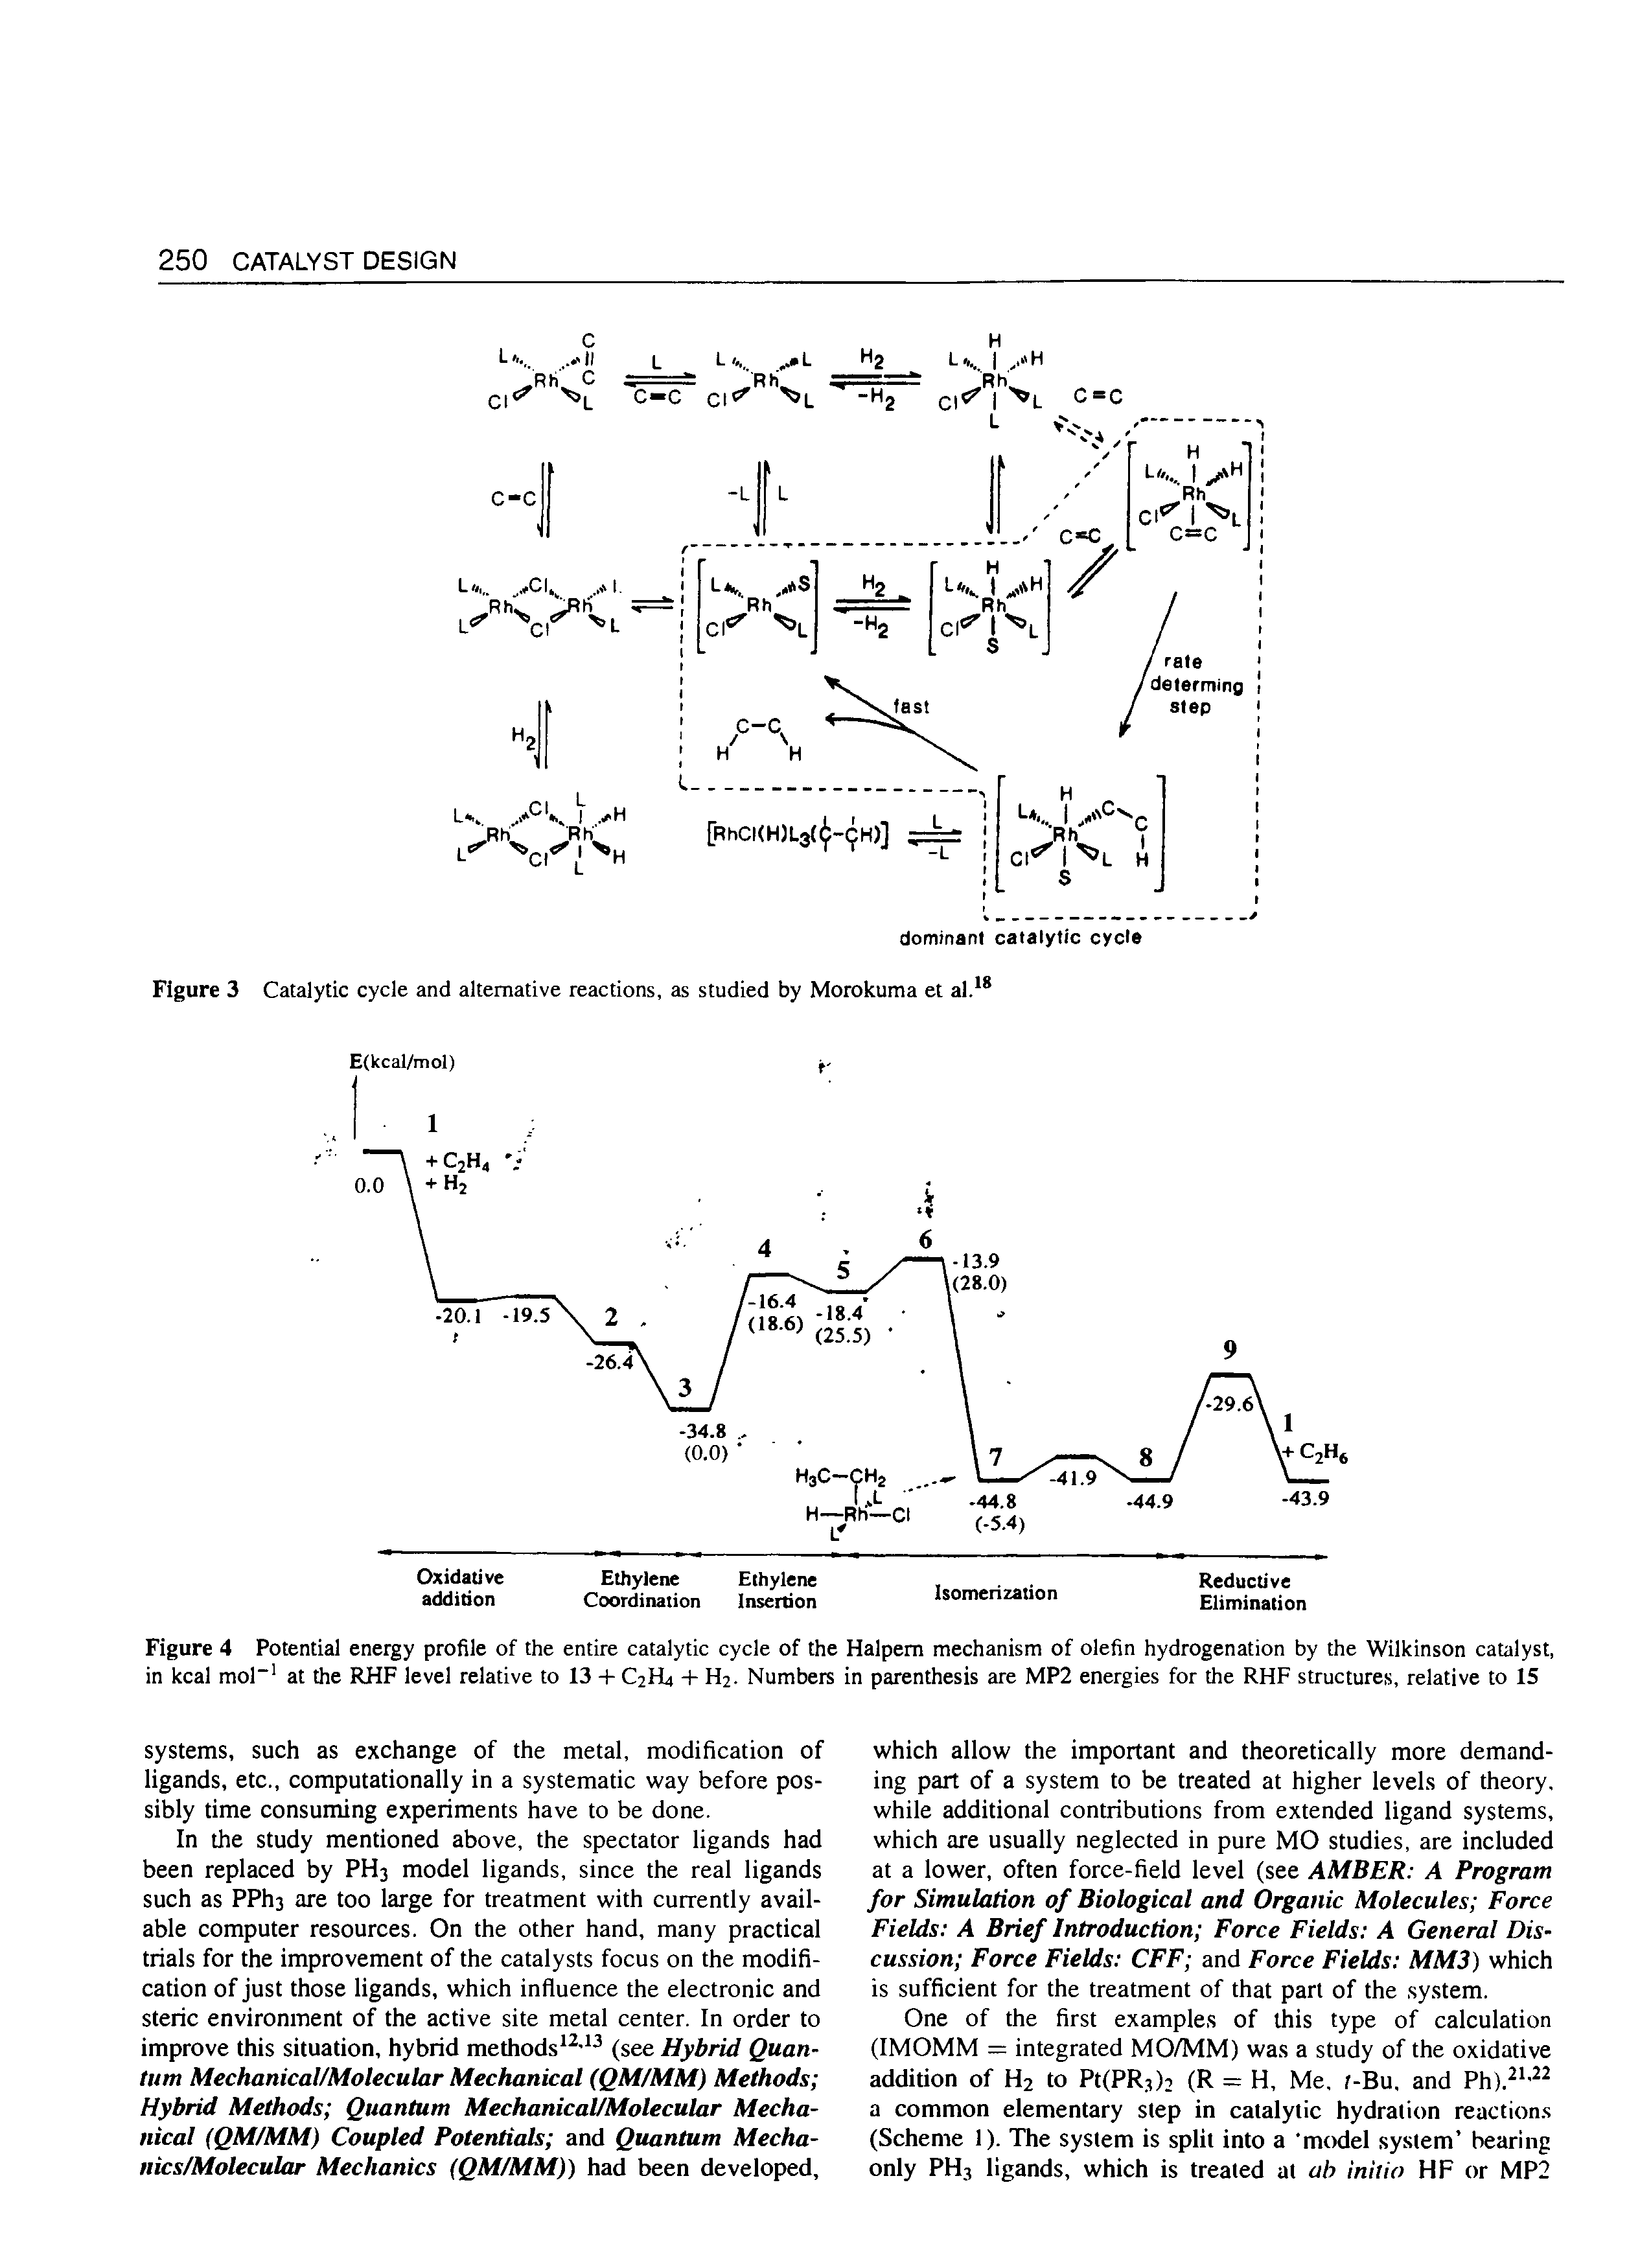 Figure 4 Potential energy profile of the entire catalytic cycle of the Halpem mechanism of olefin hydrogenation by the Wilkinson catalyst, in kcal mol at the RHF level relative to 13 + C2H4 + H2. Numbers in parenthesis are MP2 energies for the RHF structures, relative to 15...